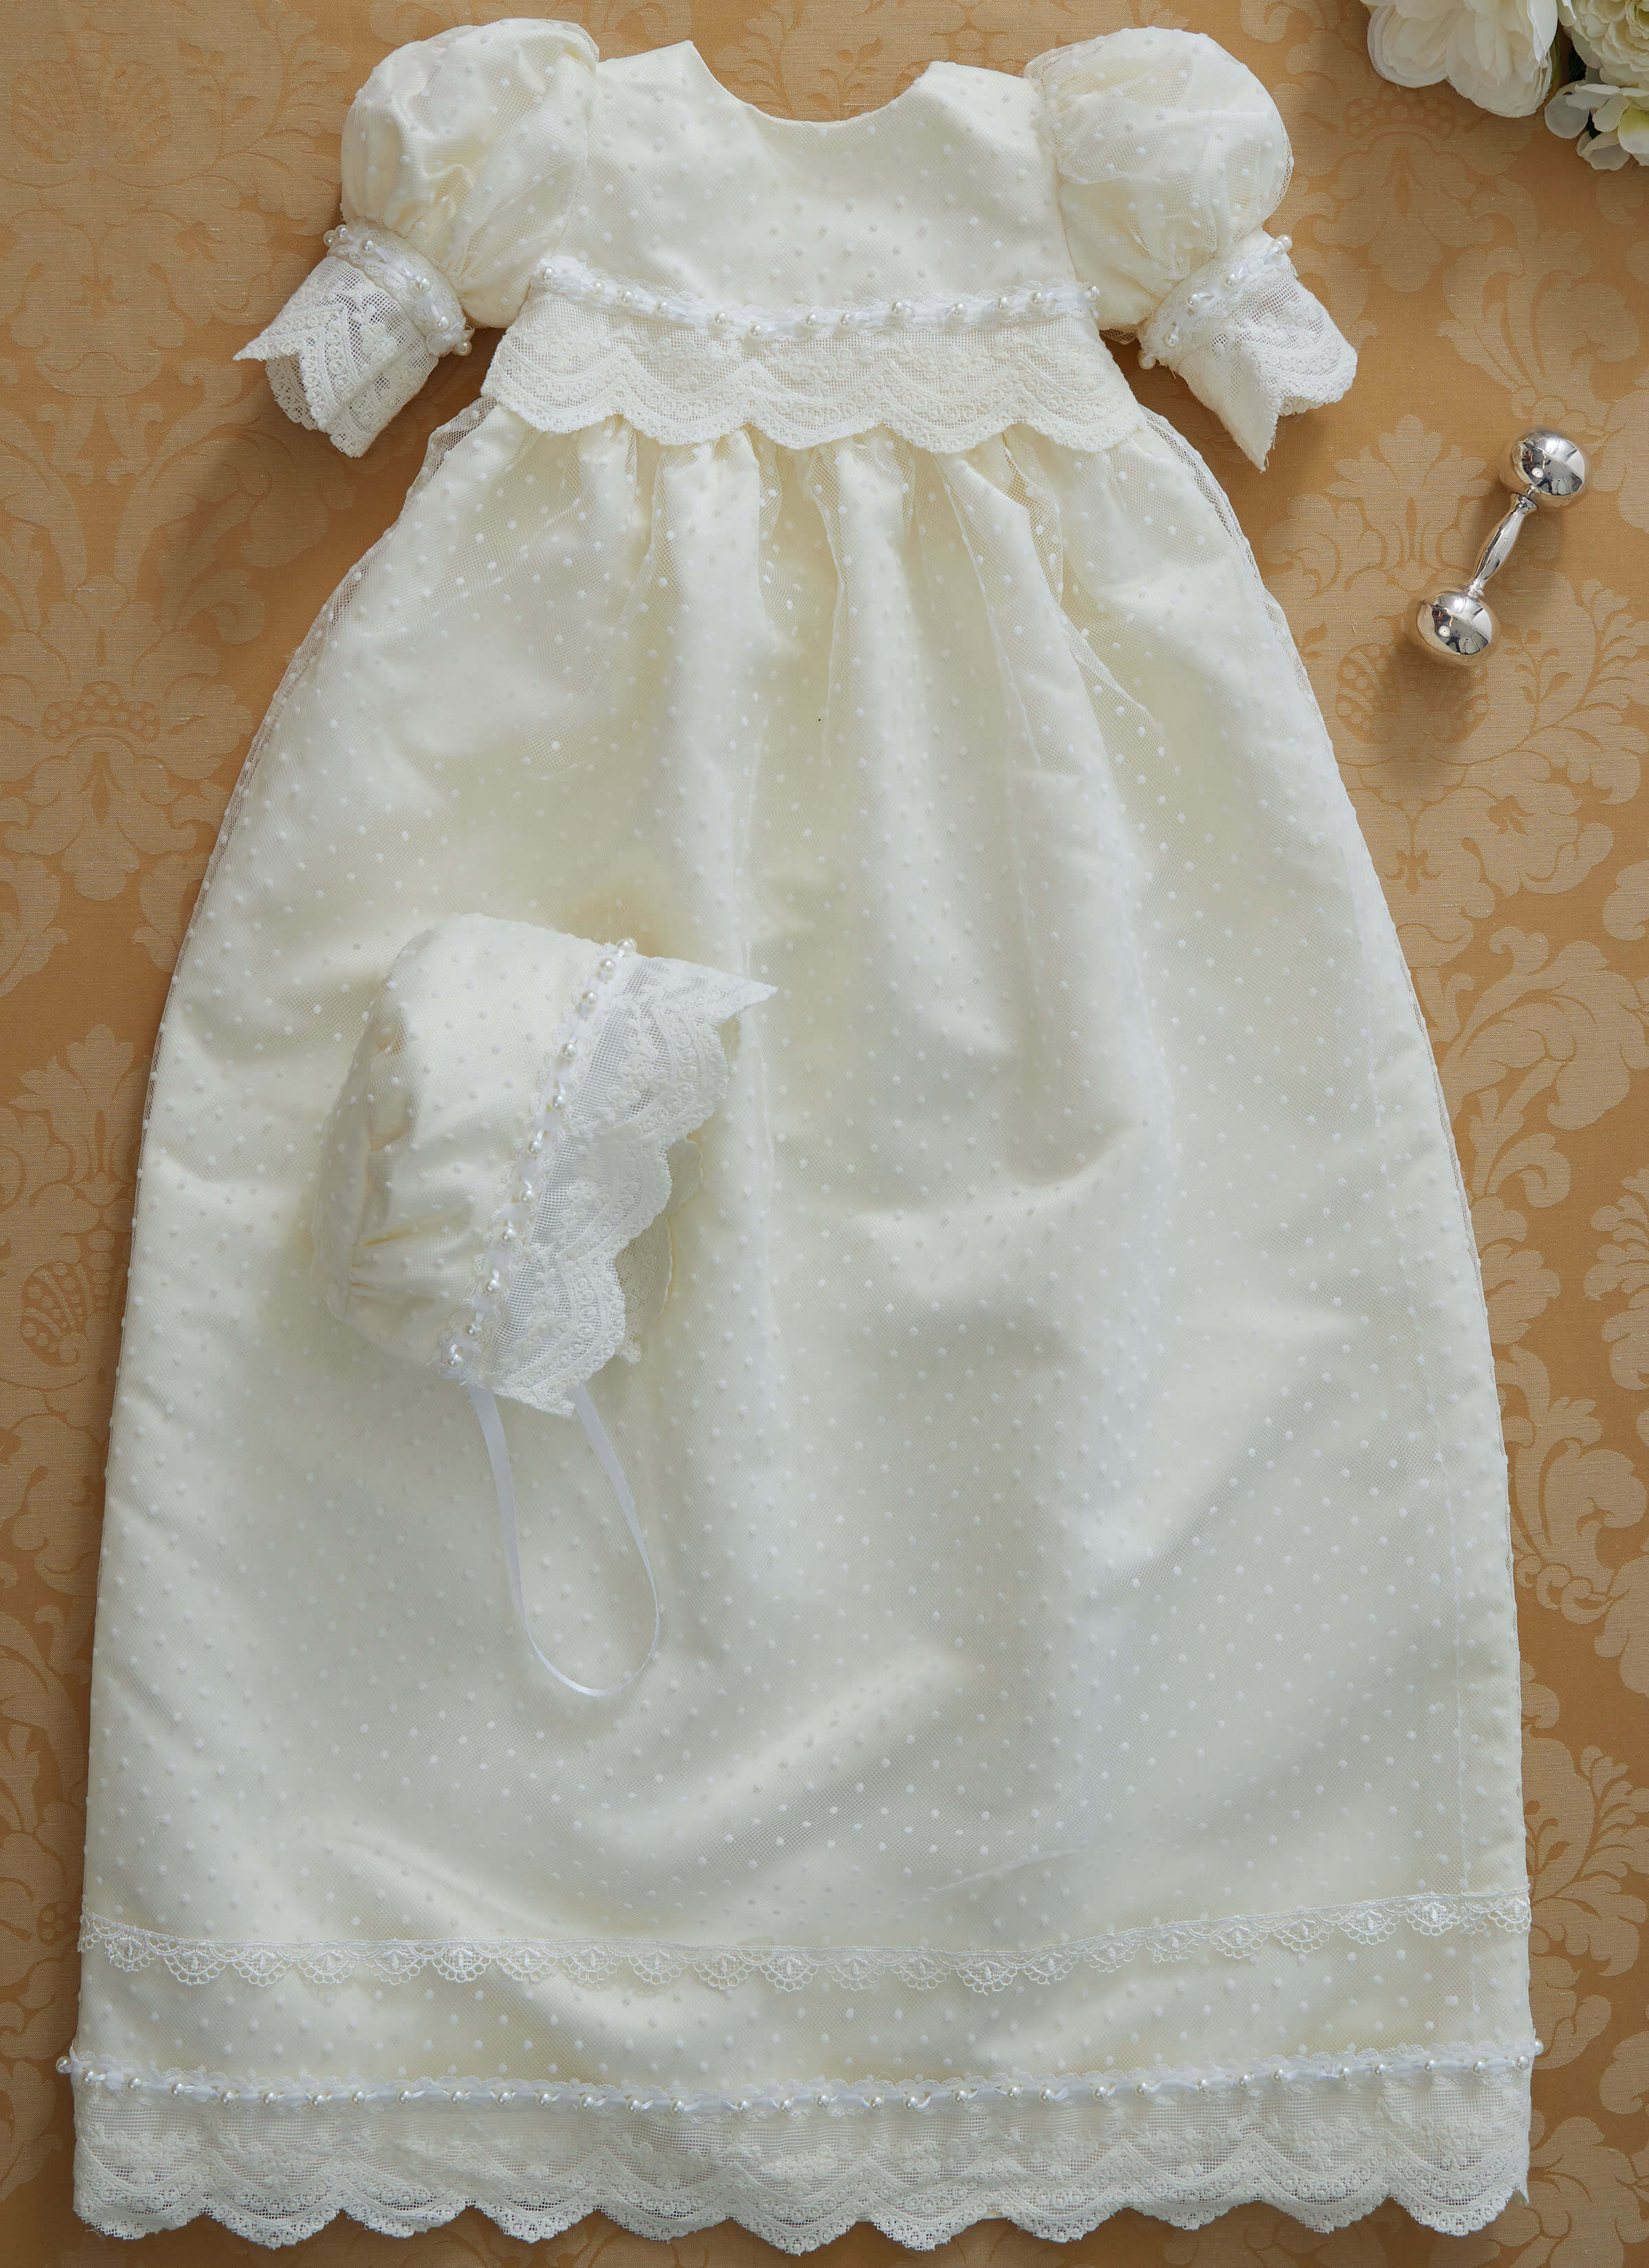 McCall's Sewing Pattern M8460 McCall's Sewing Pattern M8460 Infant's Christening Gown, Romper and Bonnet